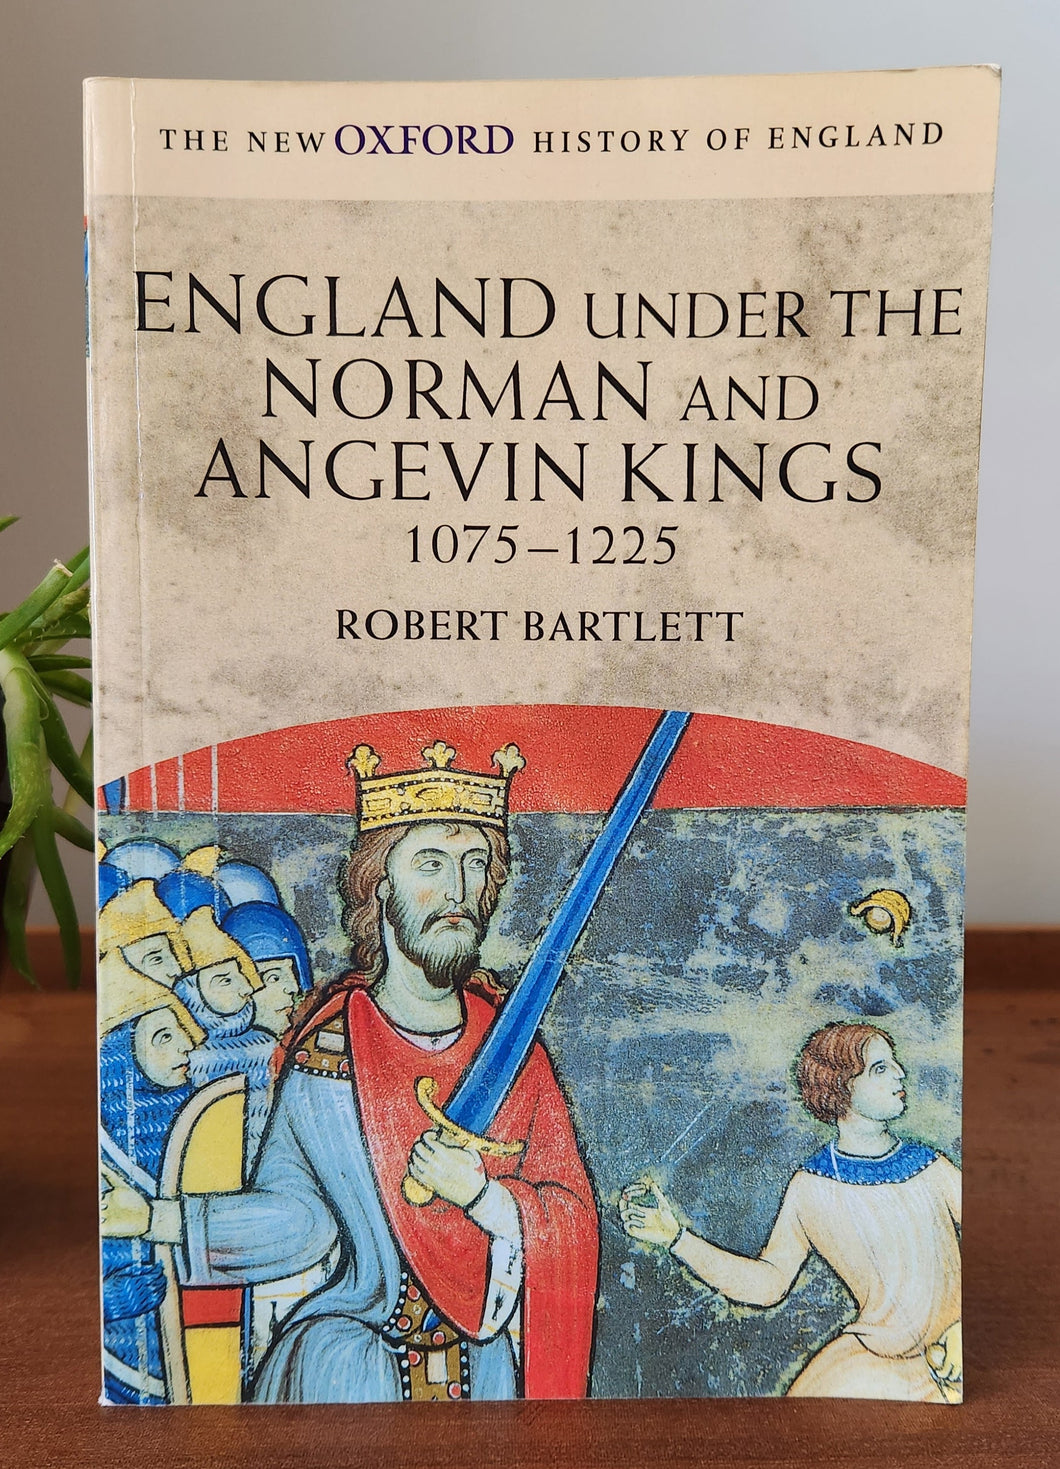 England Under the Norman and Angevin Kings 1075-1225 by Robert Bartlett